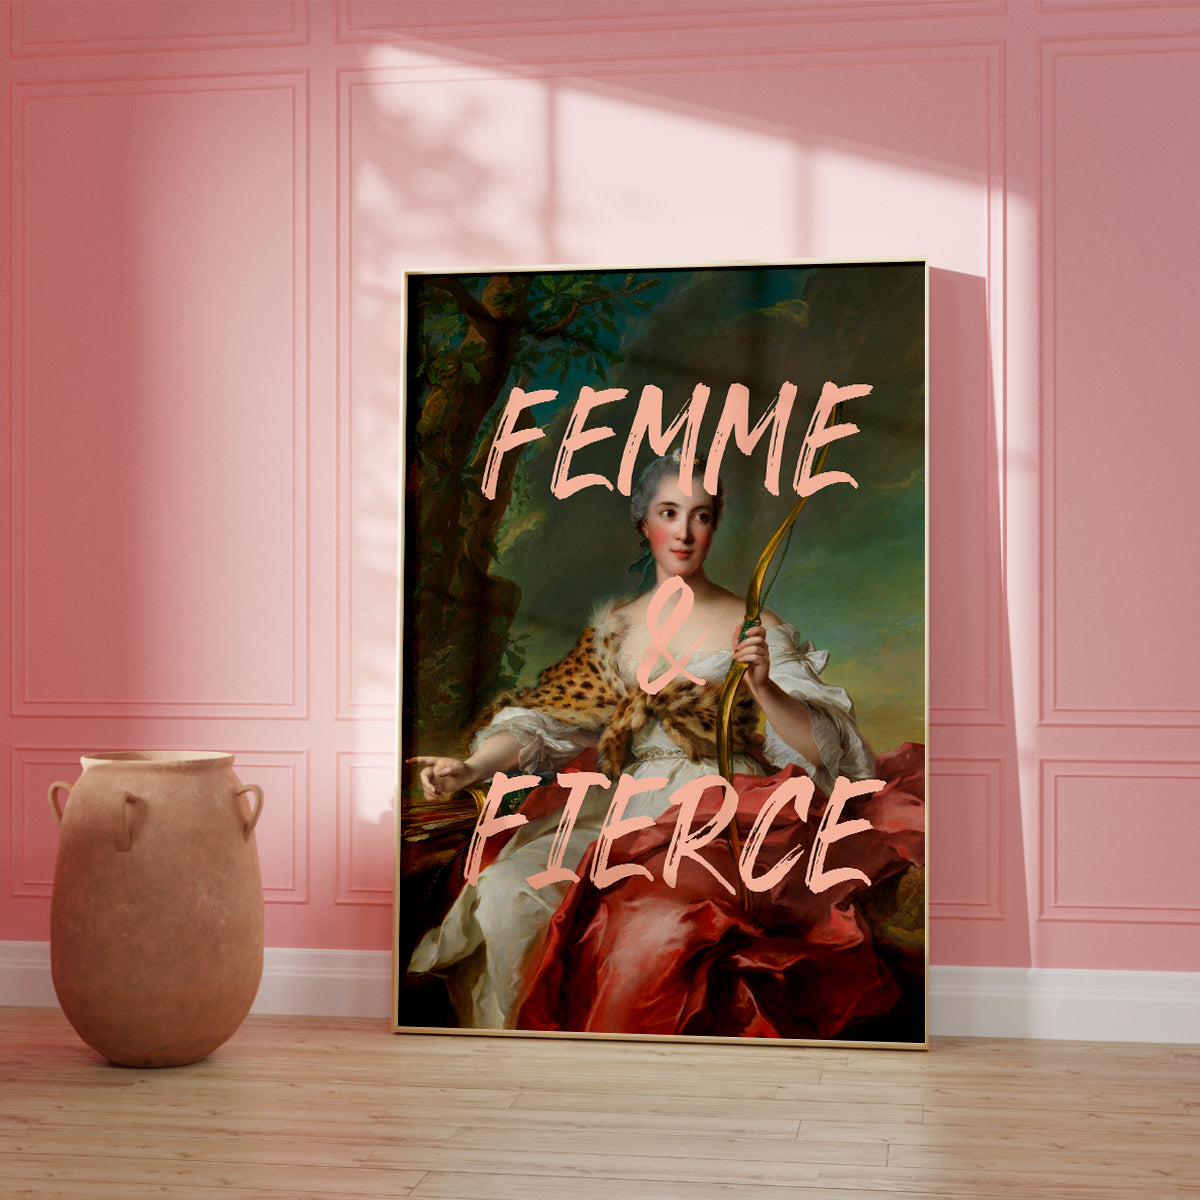 Femme and Fierce Altered Art Wall Poster